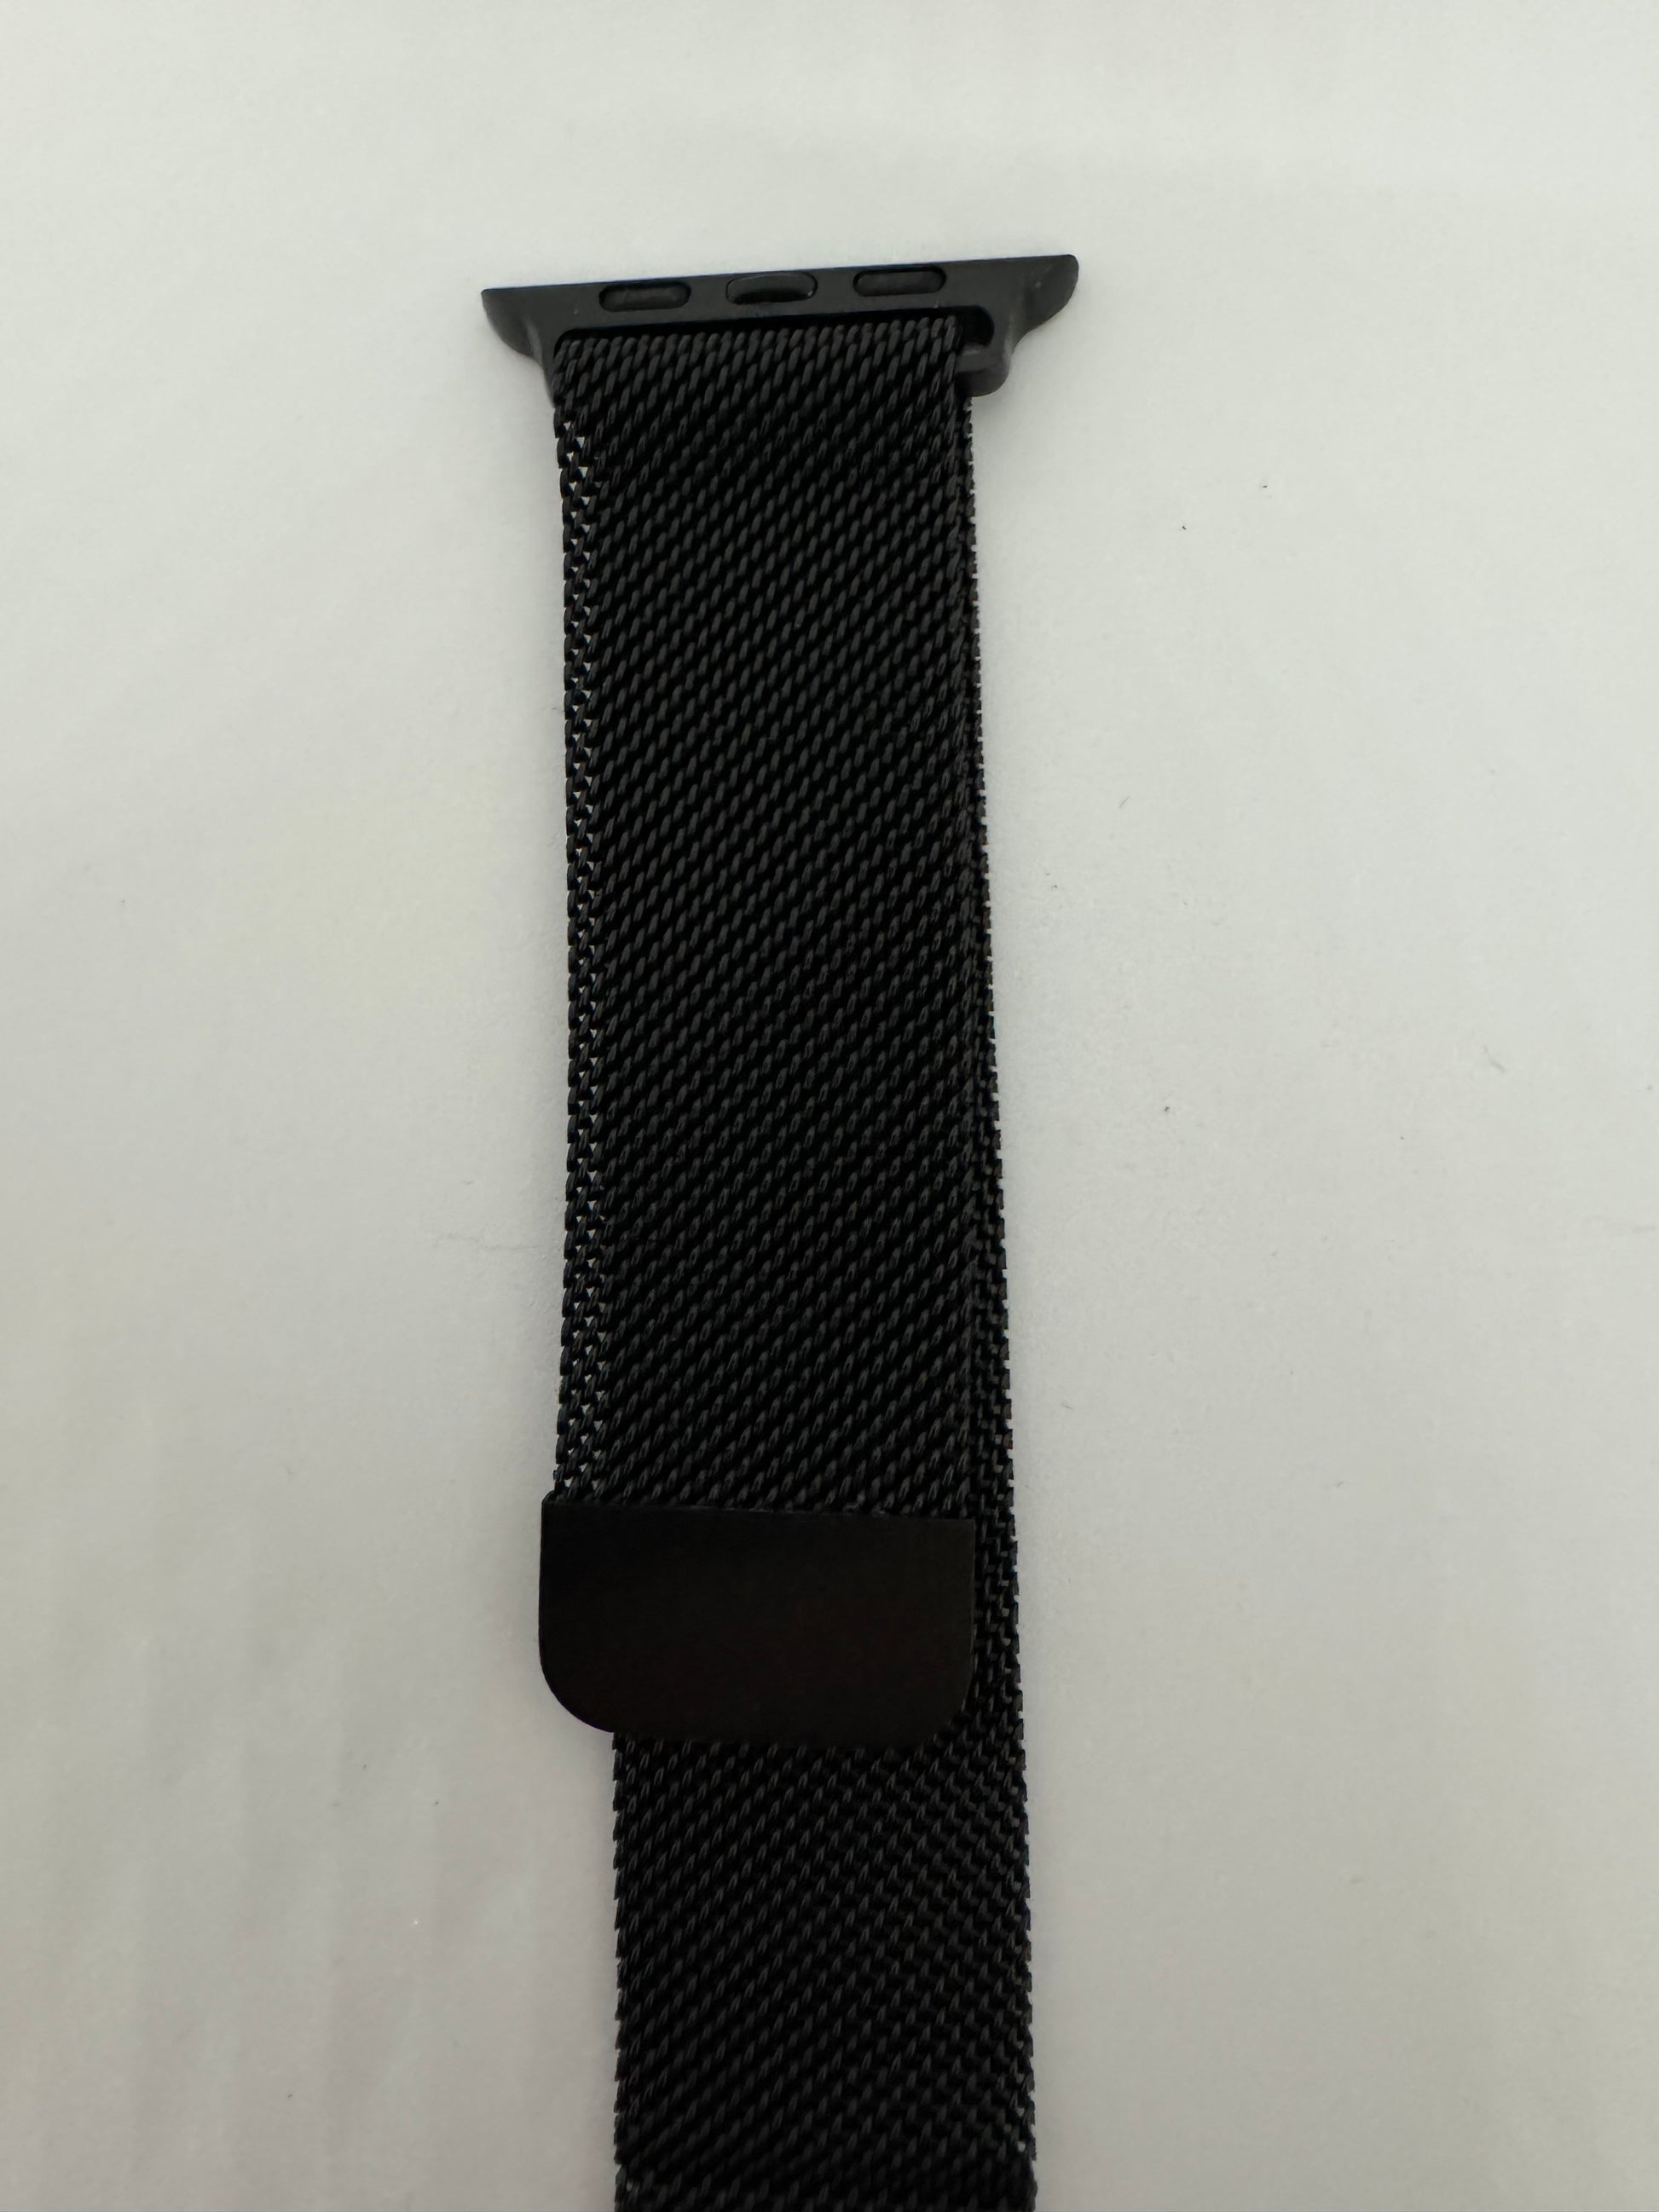 The picture shows a black watch band. It appears to be made of a tightly woven mesh material. The top of the band has a dark grey or black attachment with three small holes, which is likely used to connect it to a watch. The band is lying on a white surface. There is also a small black rectangular piece attached to the band, possibly for adjustment or decoration.